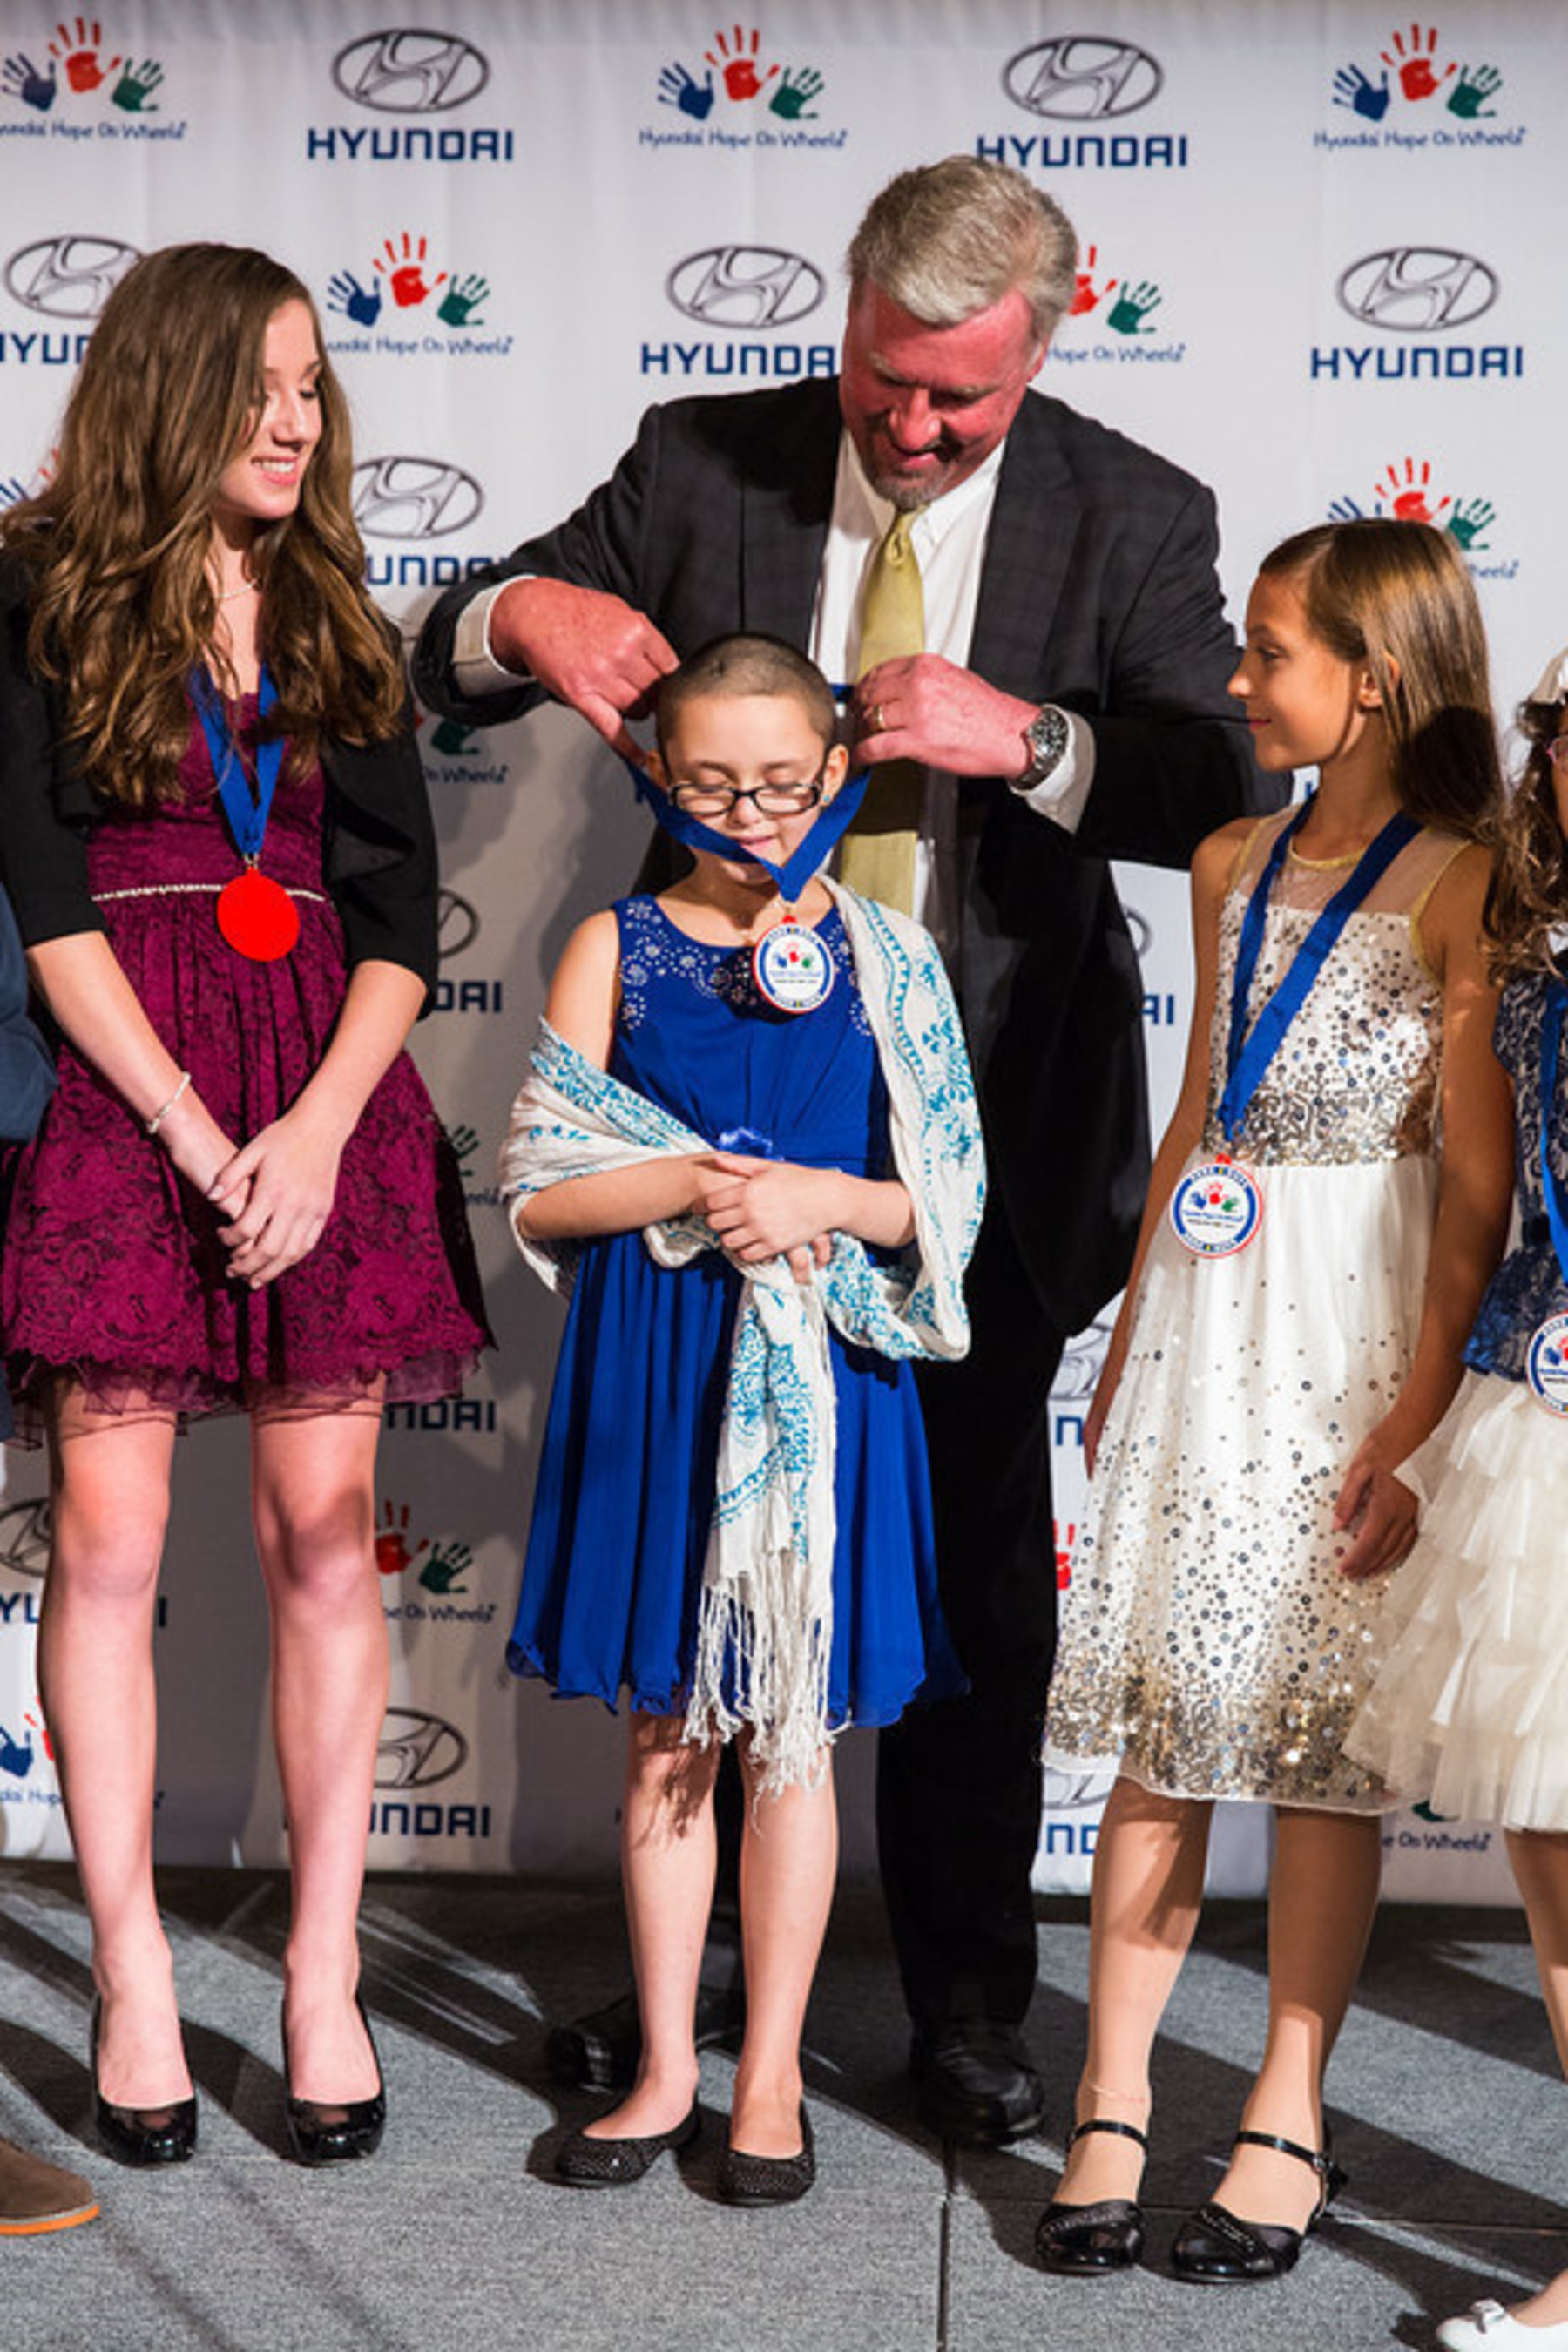 A Pediatric Cancer Fighter Receives a Medal of Recognition from Hyundai Motor America President and CEO Dave Zuchowski